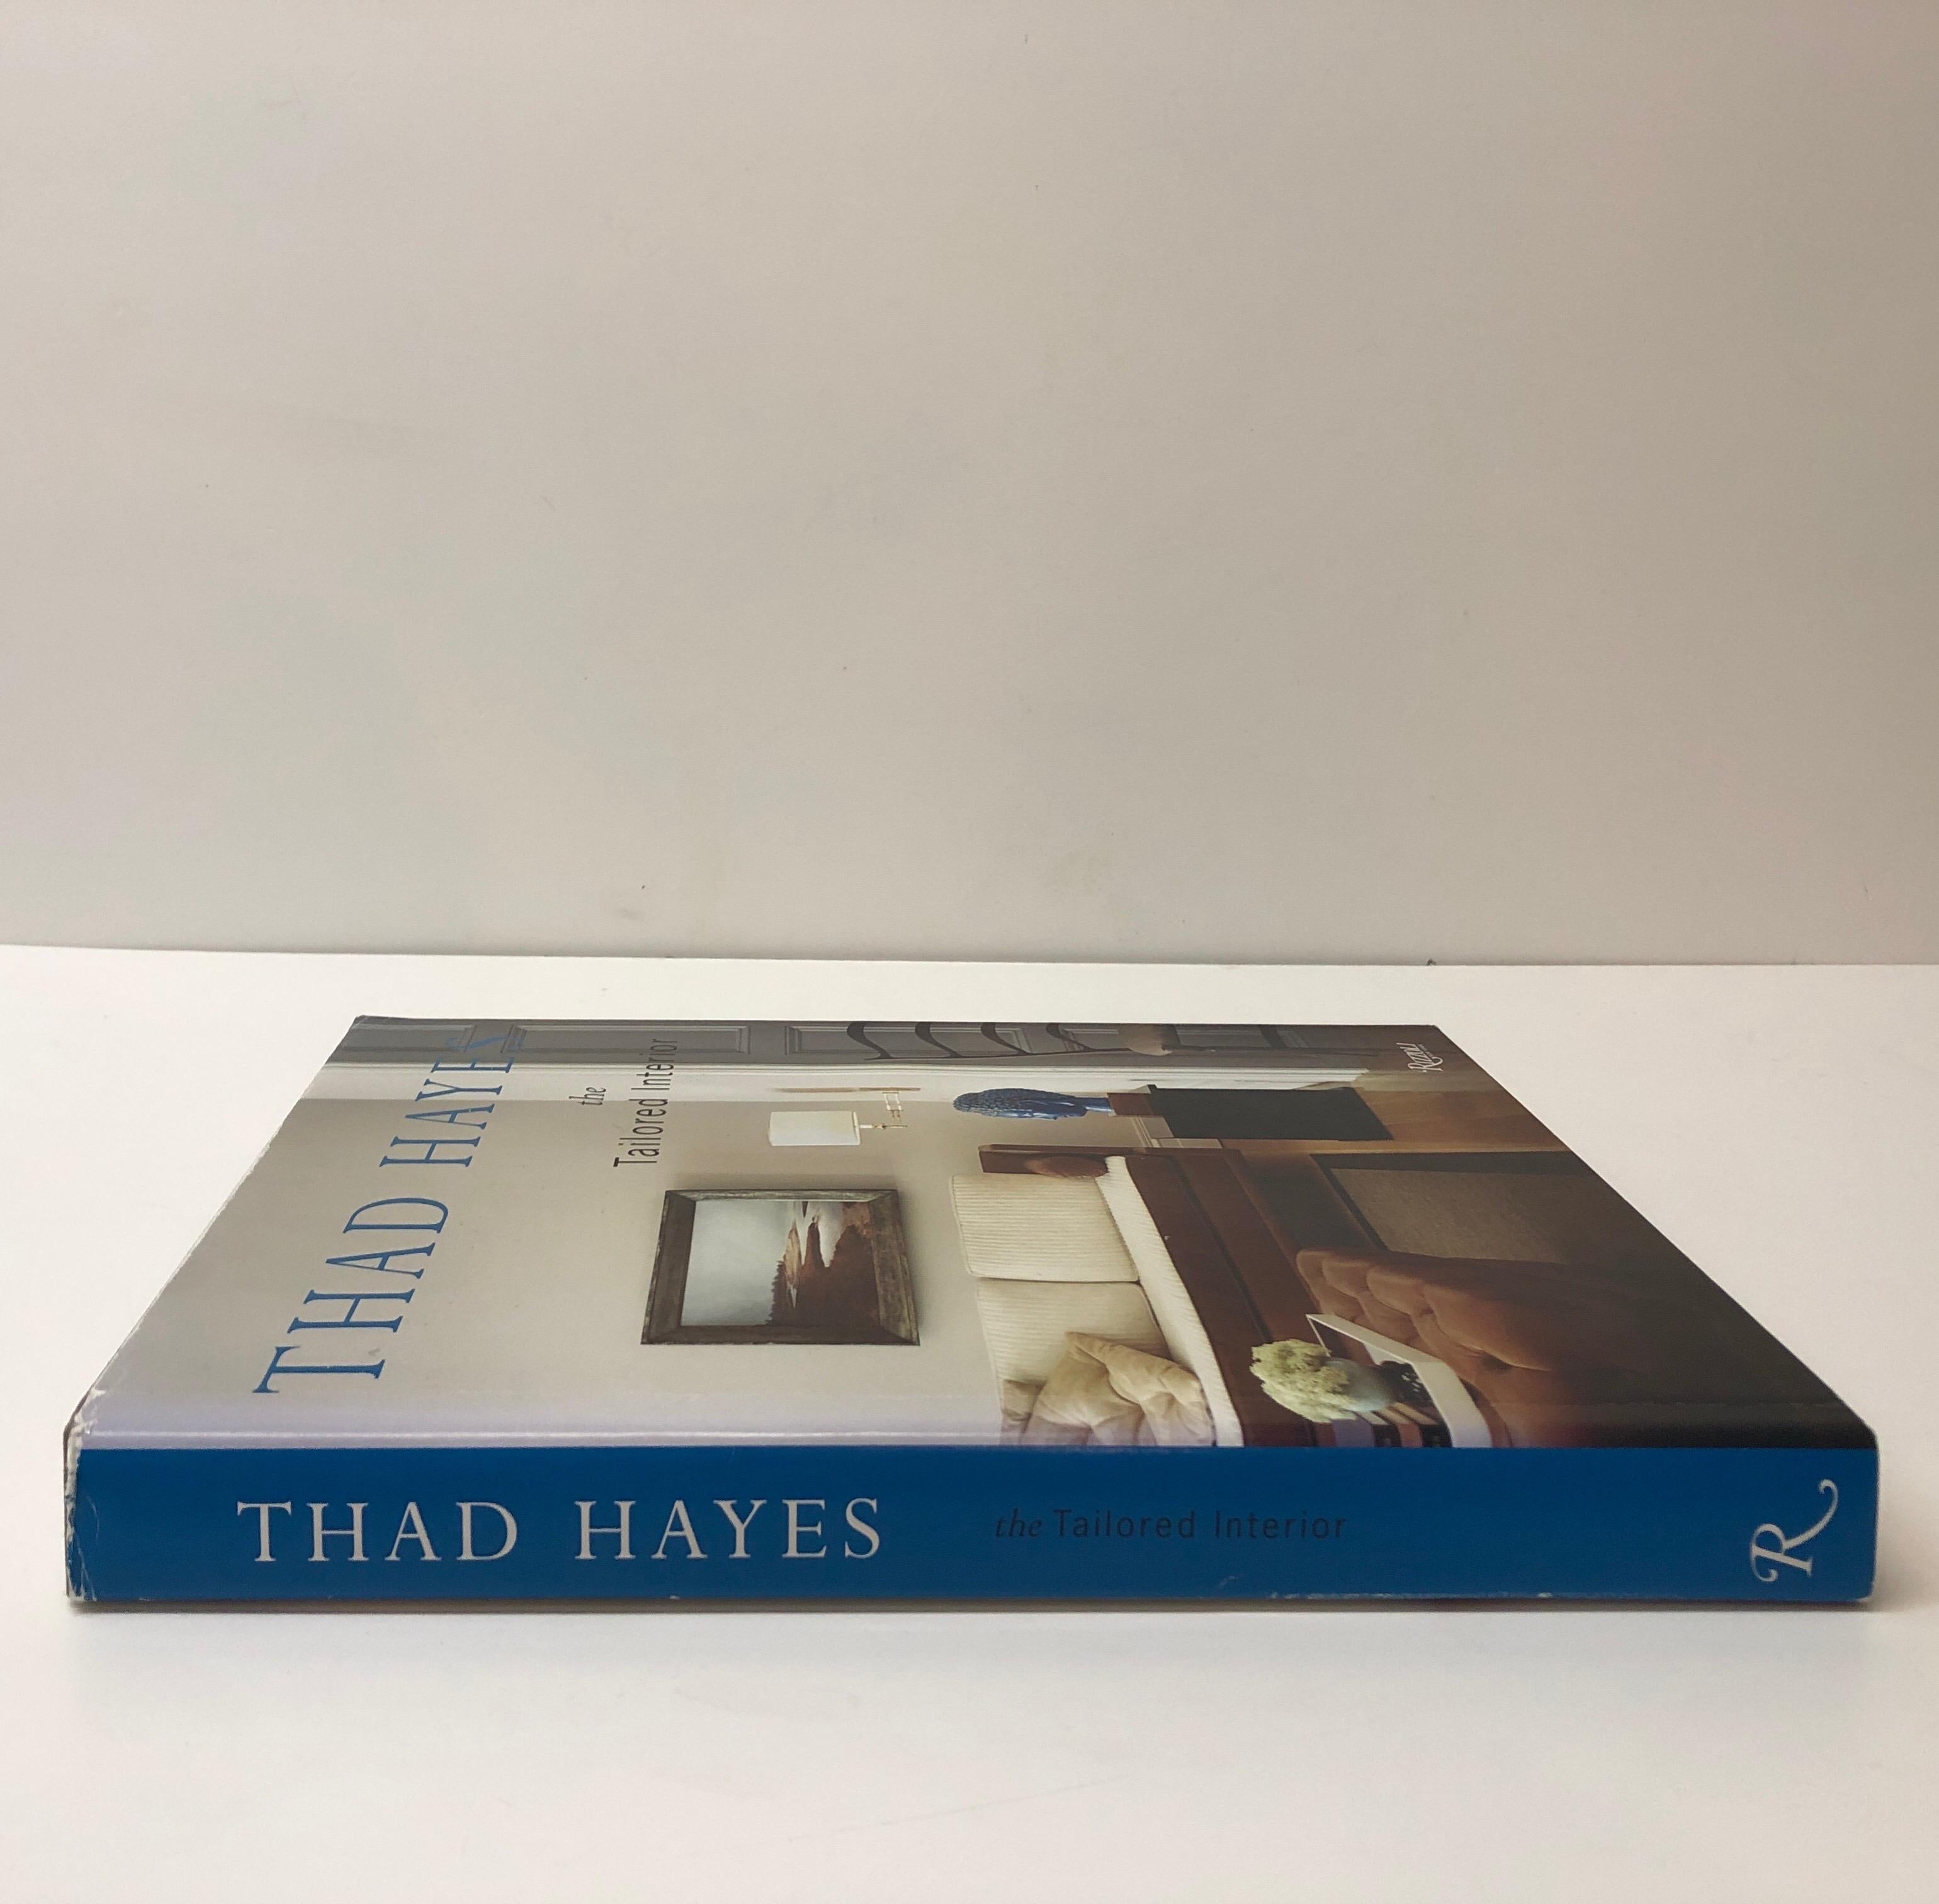 Asian Thad Hayes The Tailored Interior Book